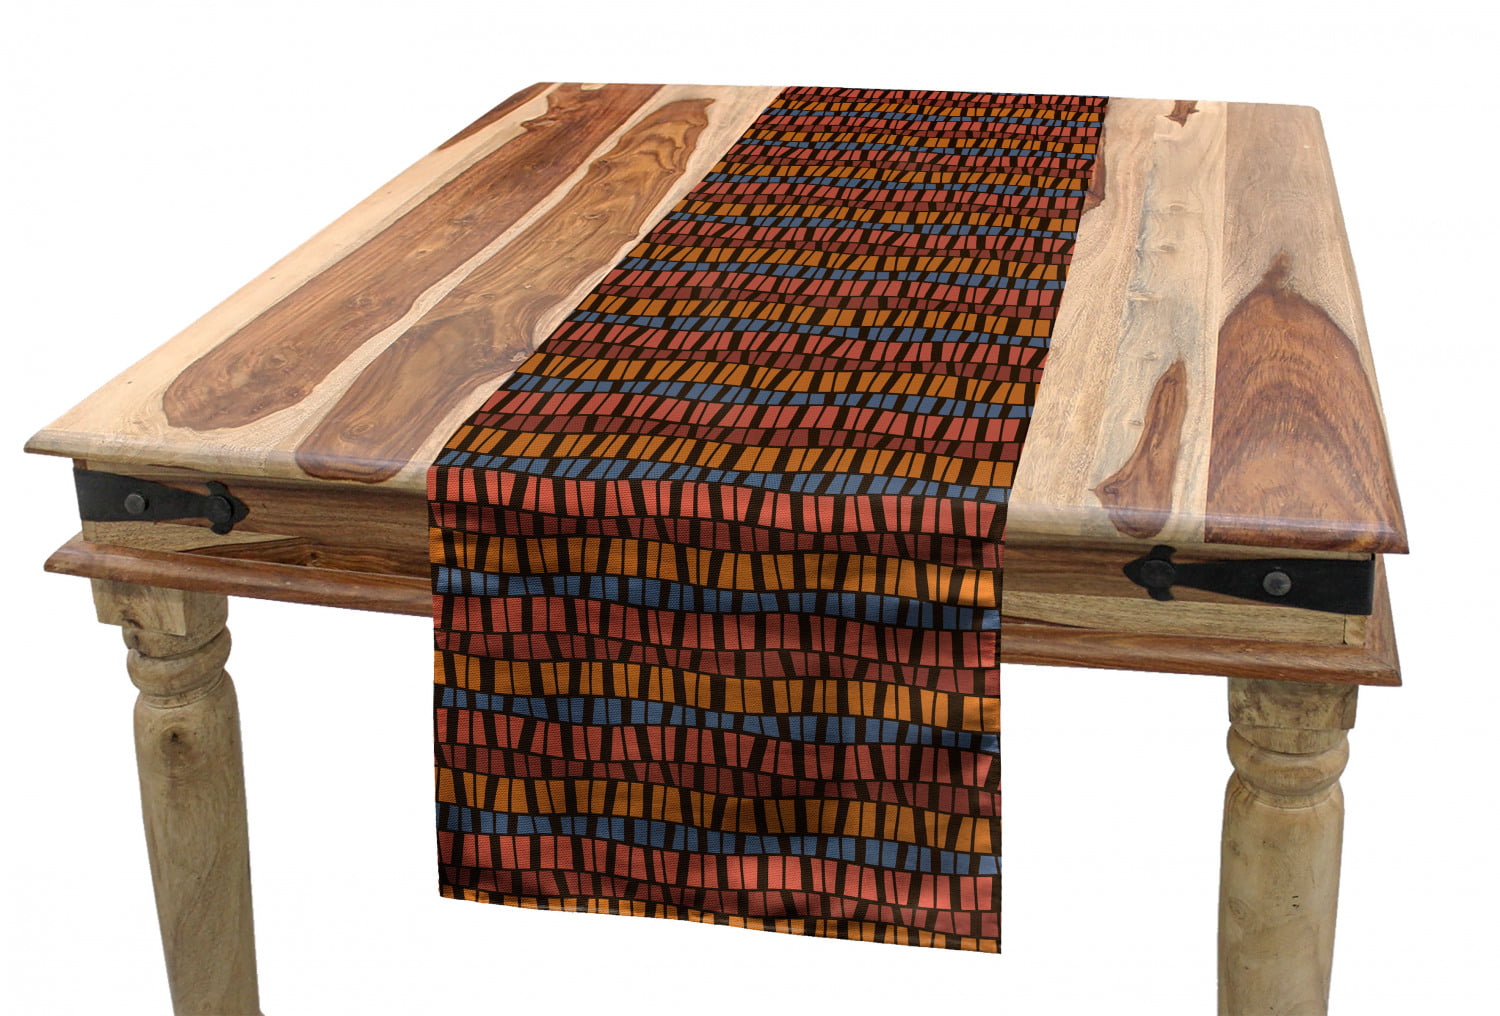 Ambesonne Retro Table Runner 16 X 72 Dining Room Kitchen Rectangular Runner Multicolor Brown Toned Geometric Tile Composition Graphic Illustration with Small Color Blocks